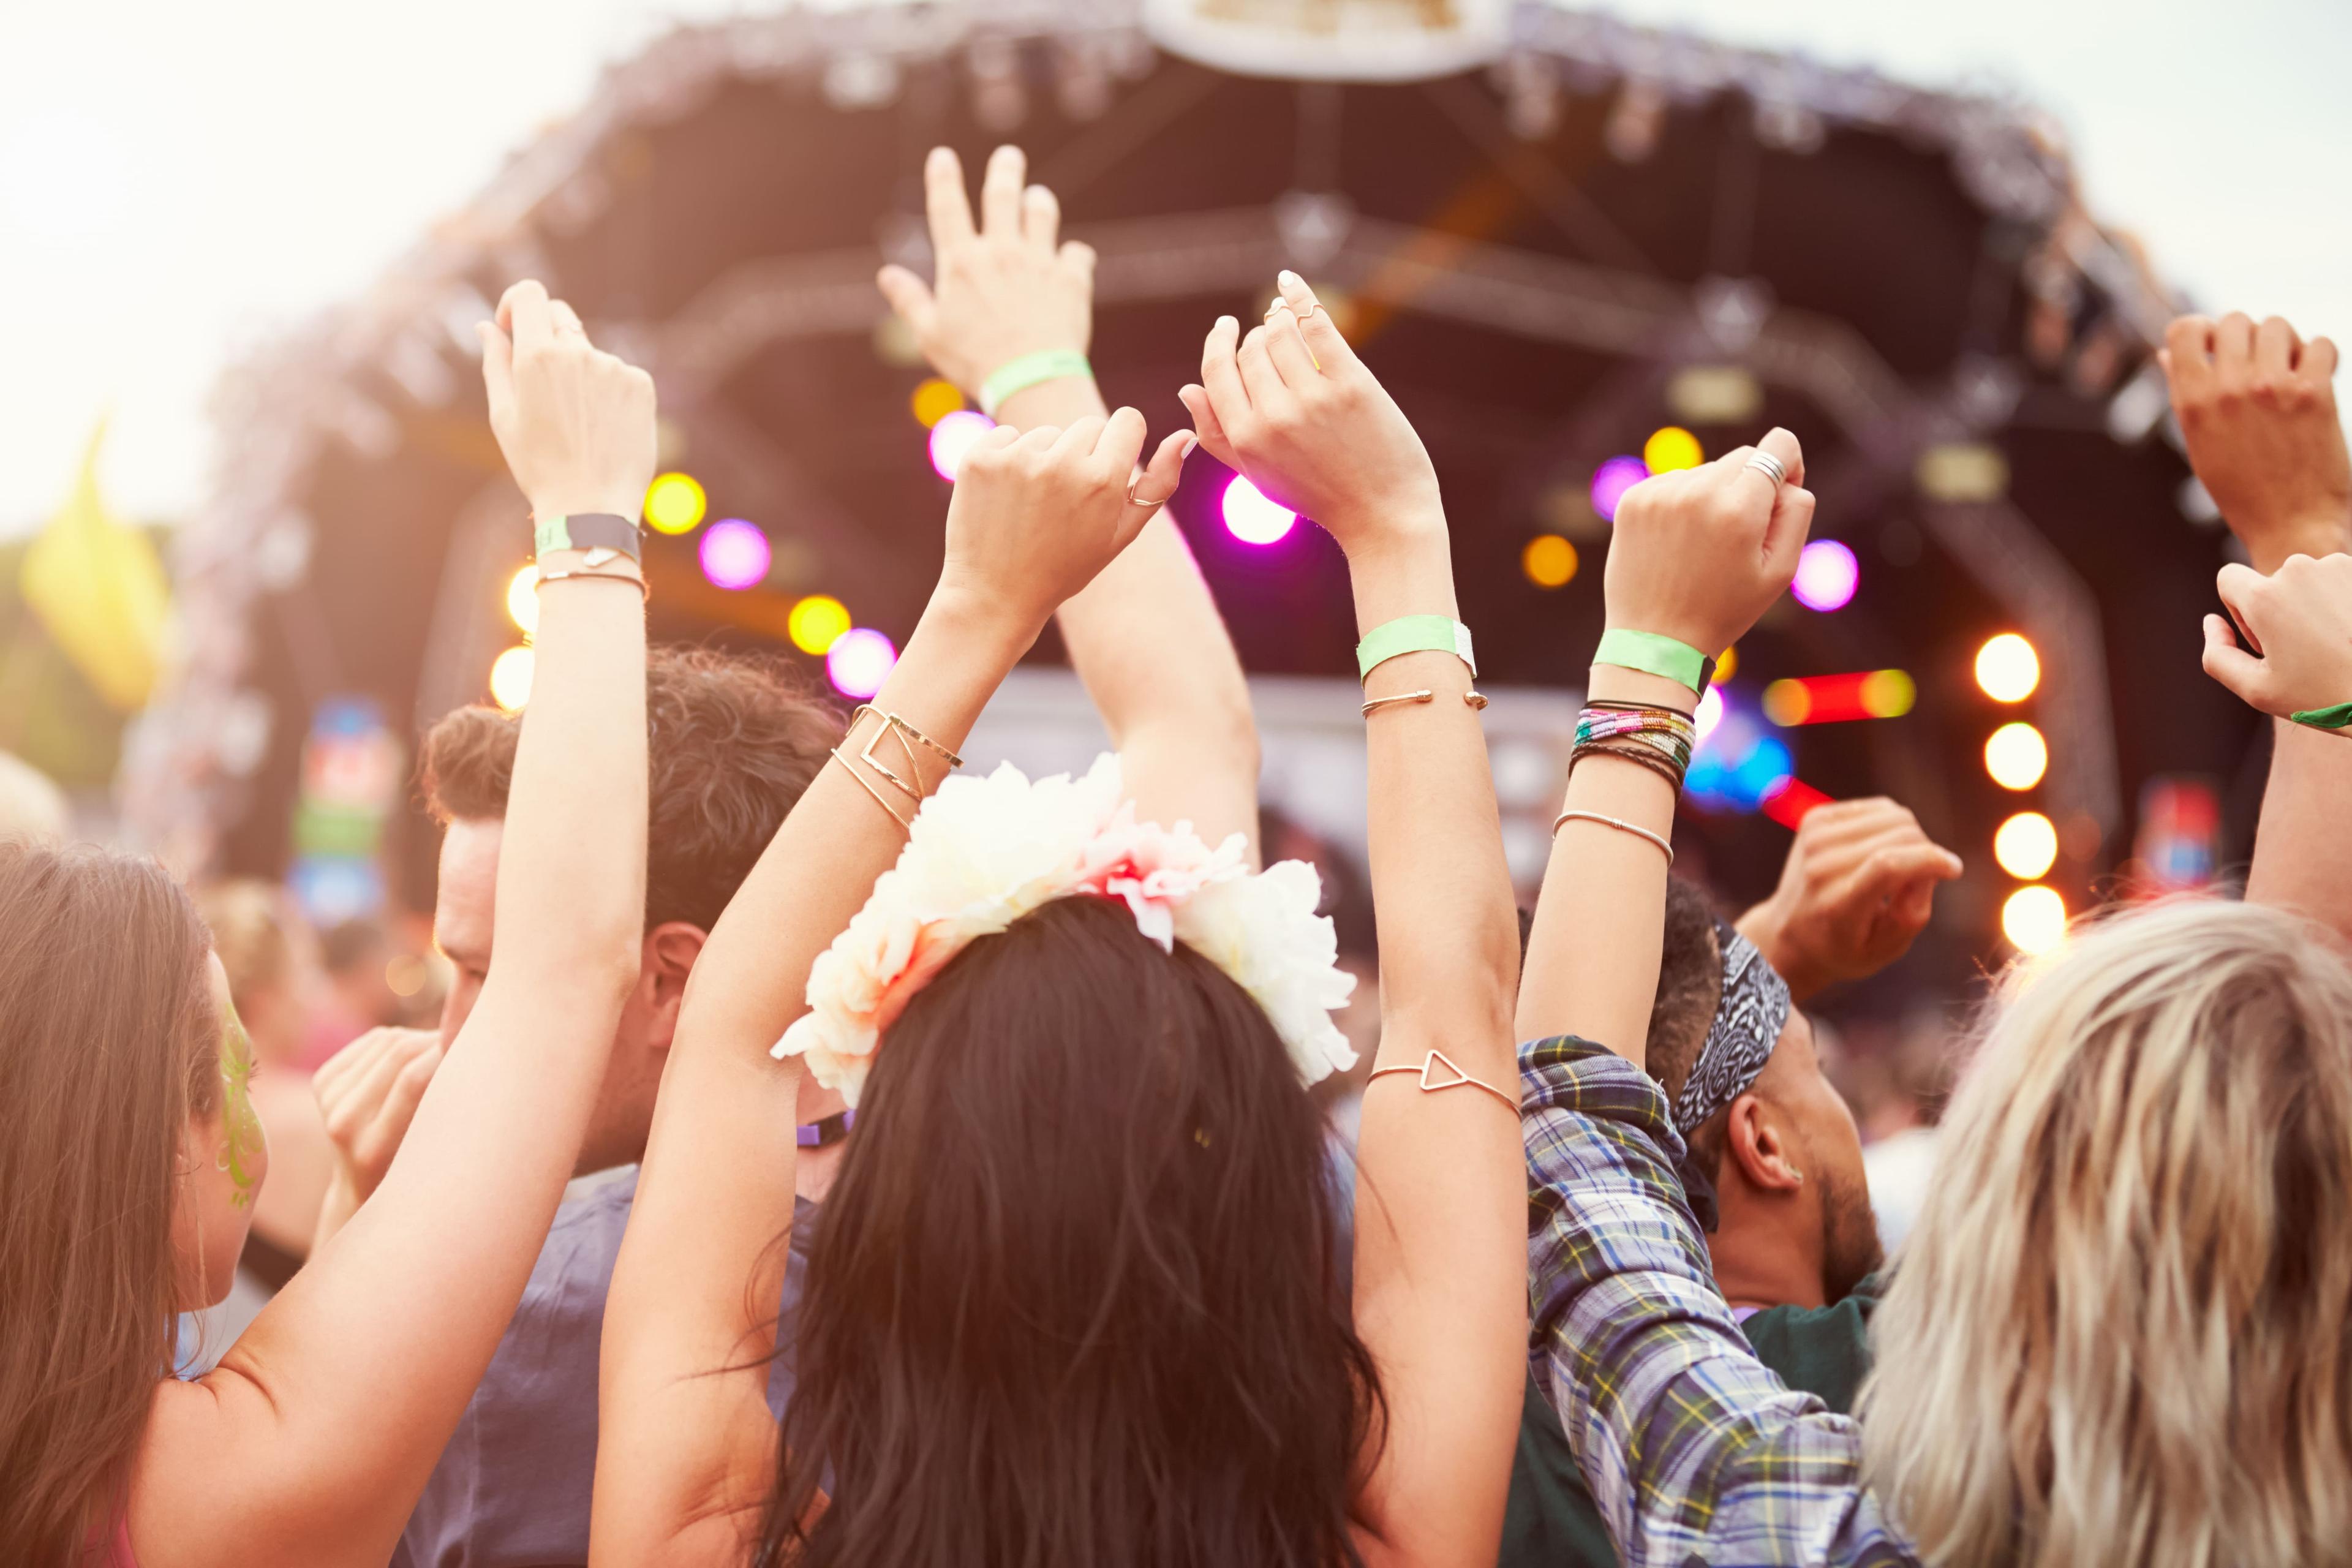 WILL GETTING VACCINATED BE YOUR TICKET INTO MUSIC FESTIVALS OF TOMORROW?